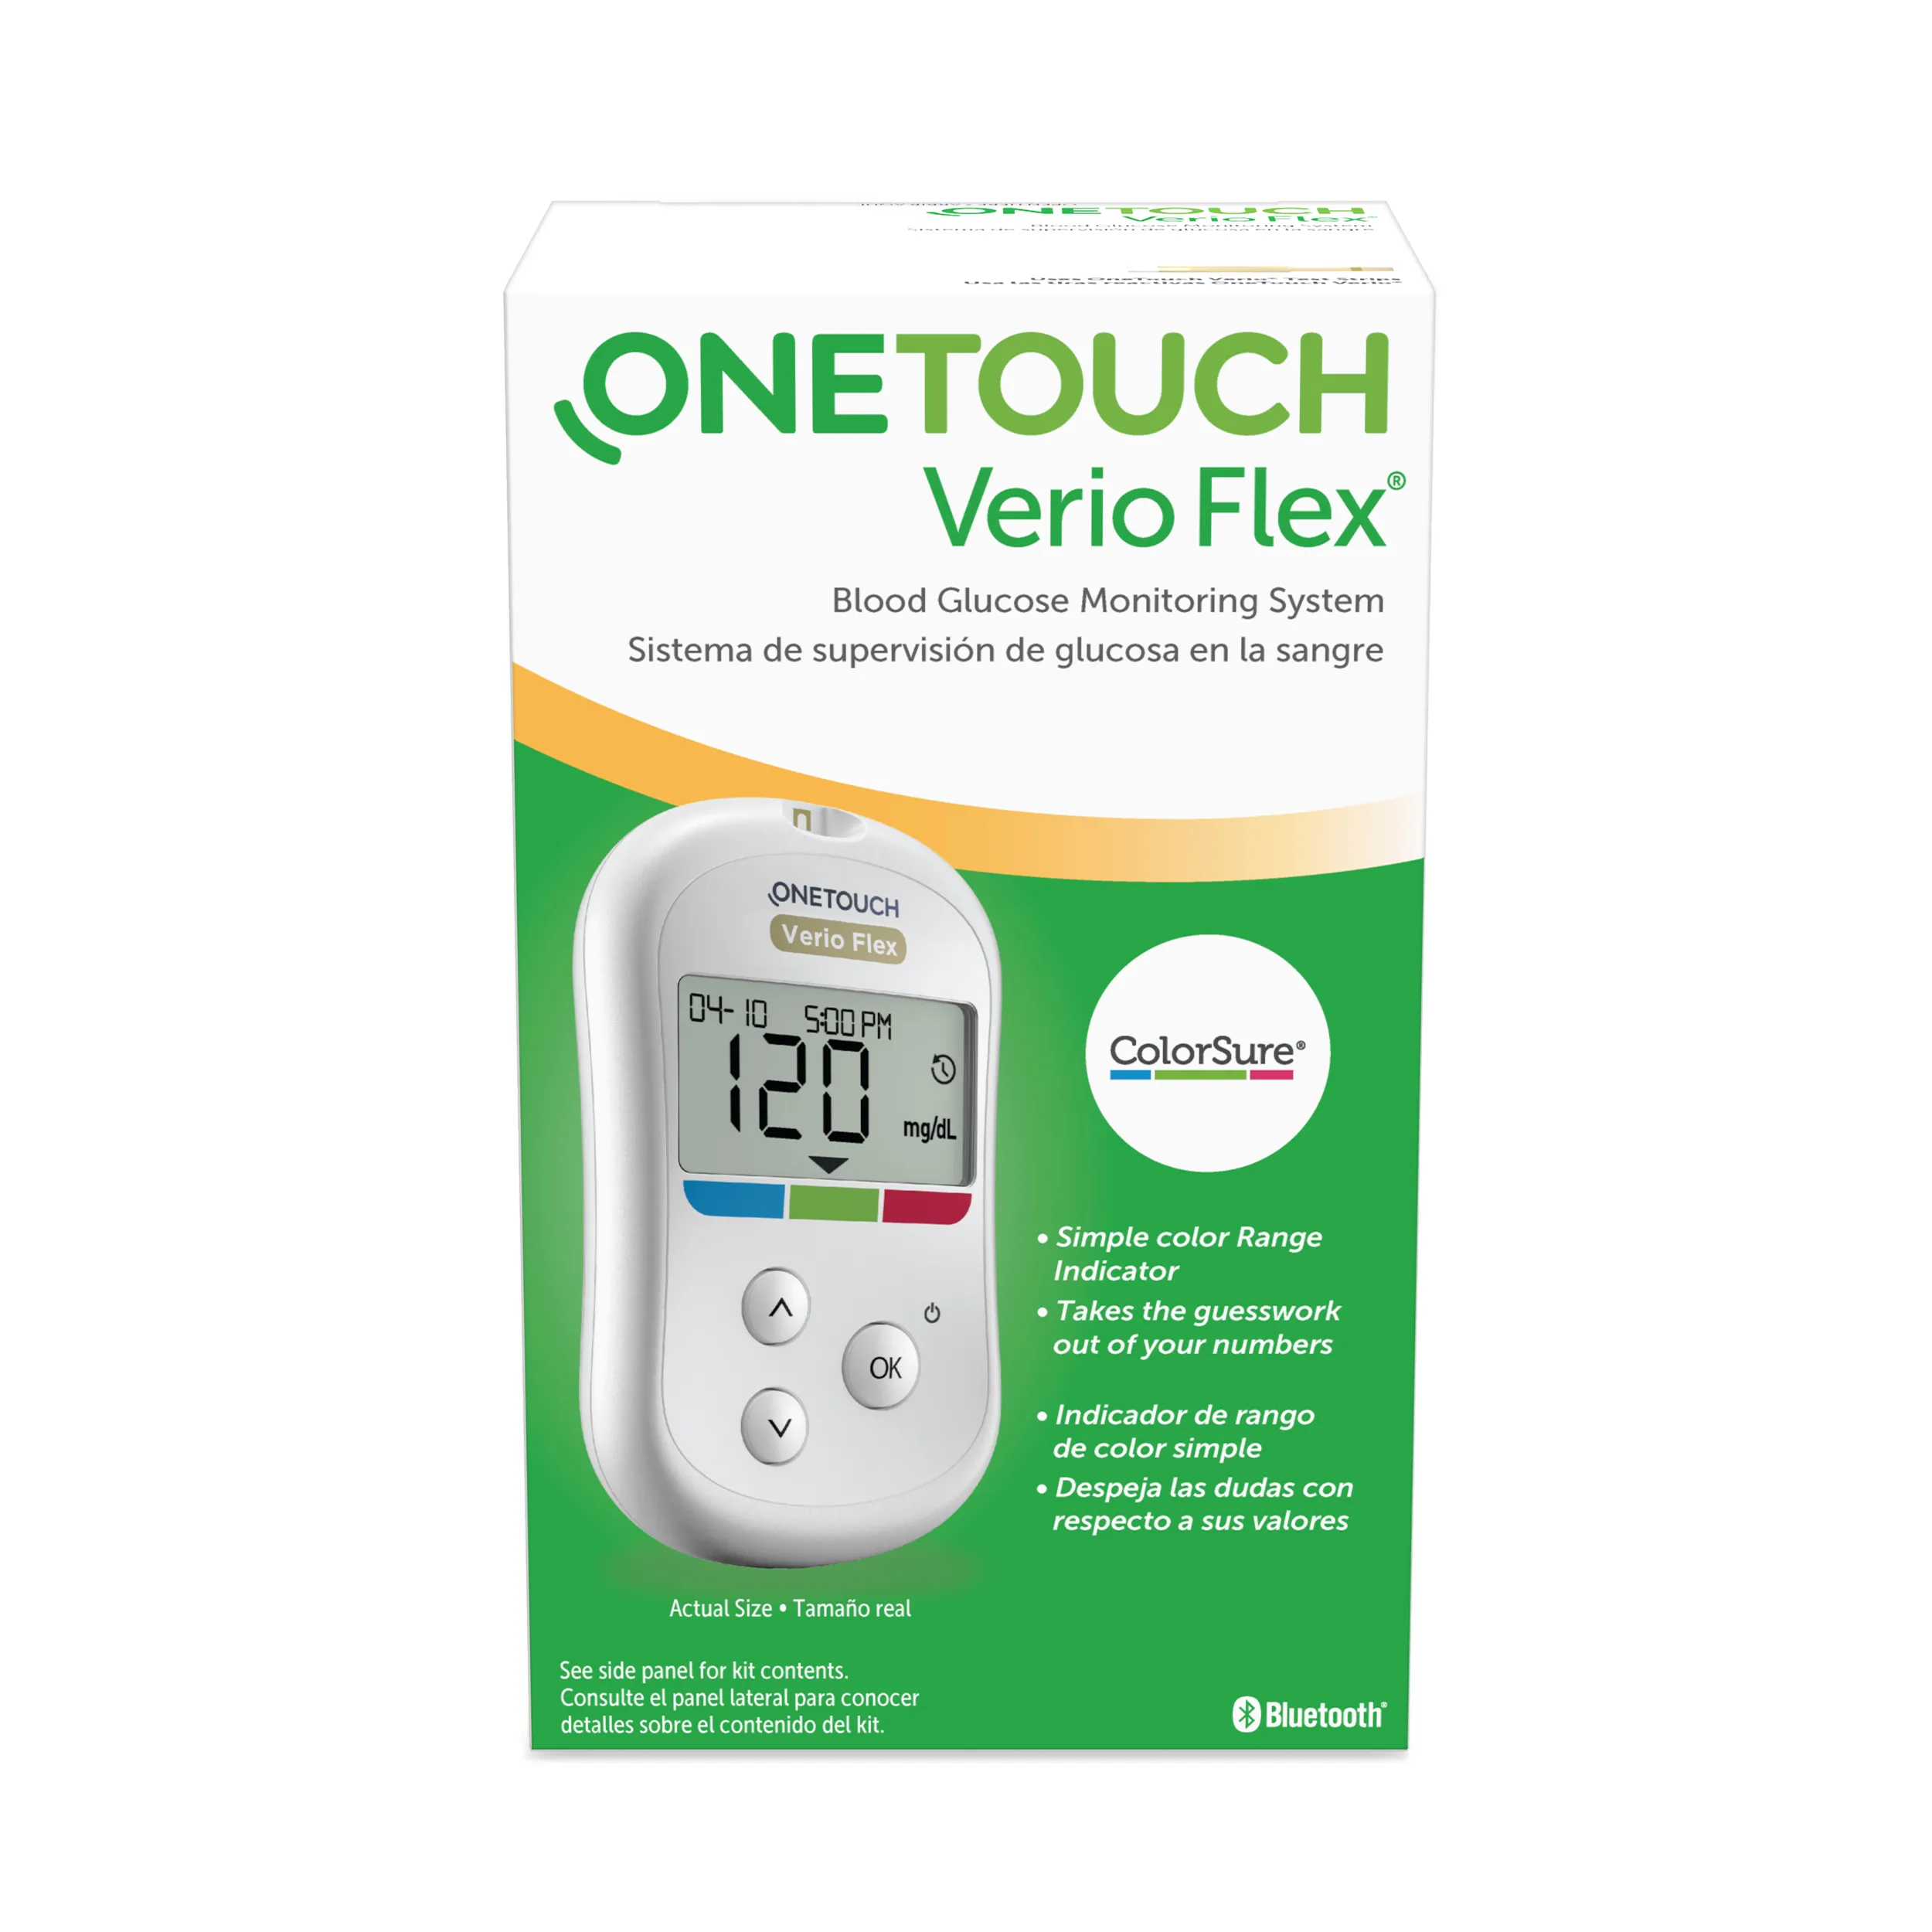 Lifescan - 024-044 - Onetouch Verio Flex Blood Glucose Monitoring System